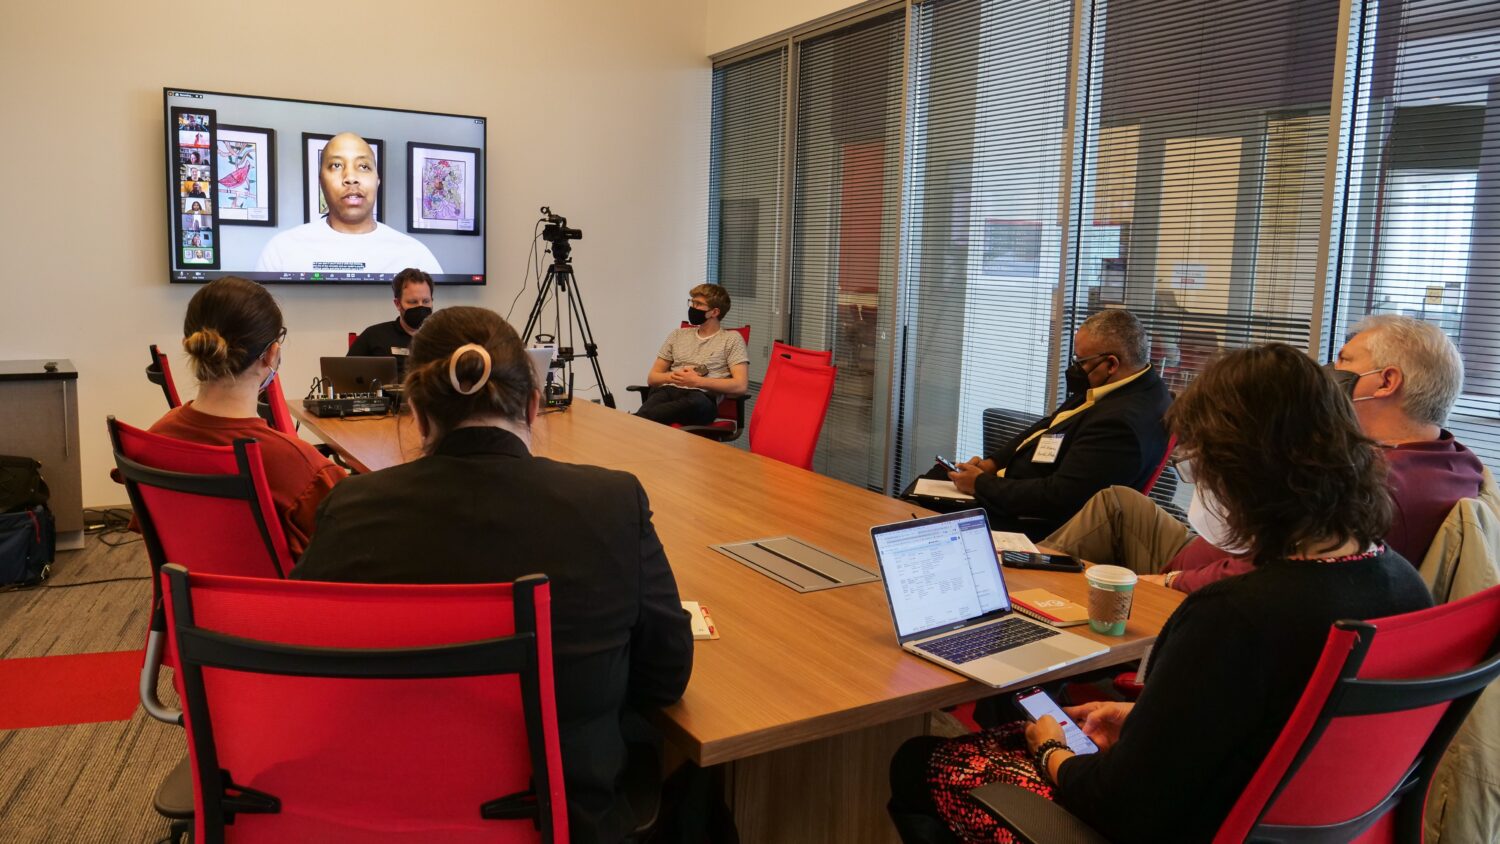 Several people sit around a conference table watching a virtual presentation on a screen mounted on the wall.